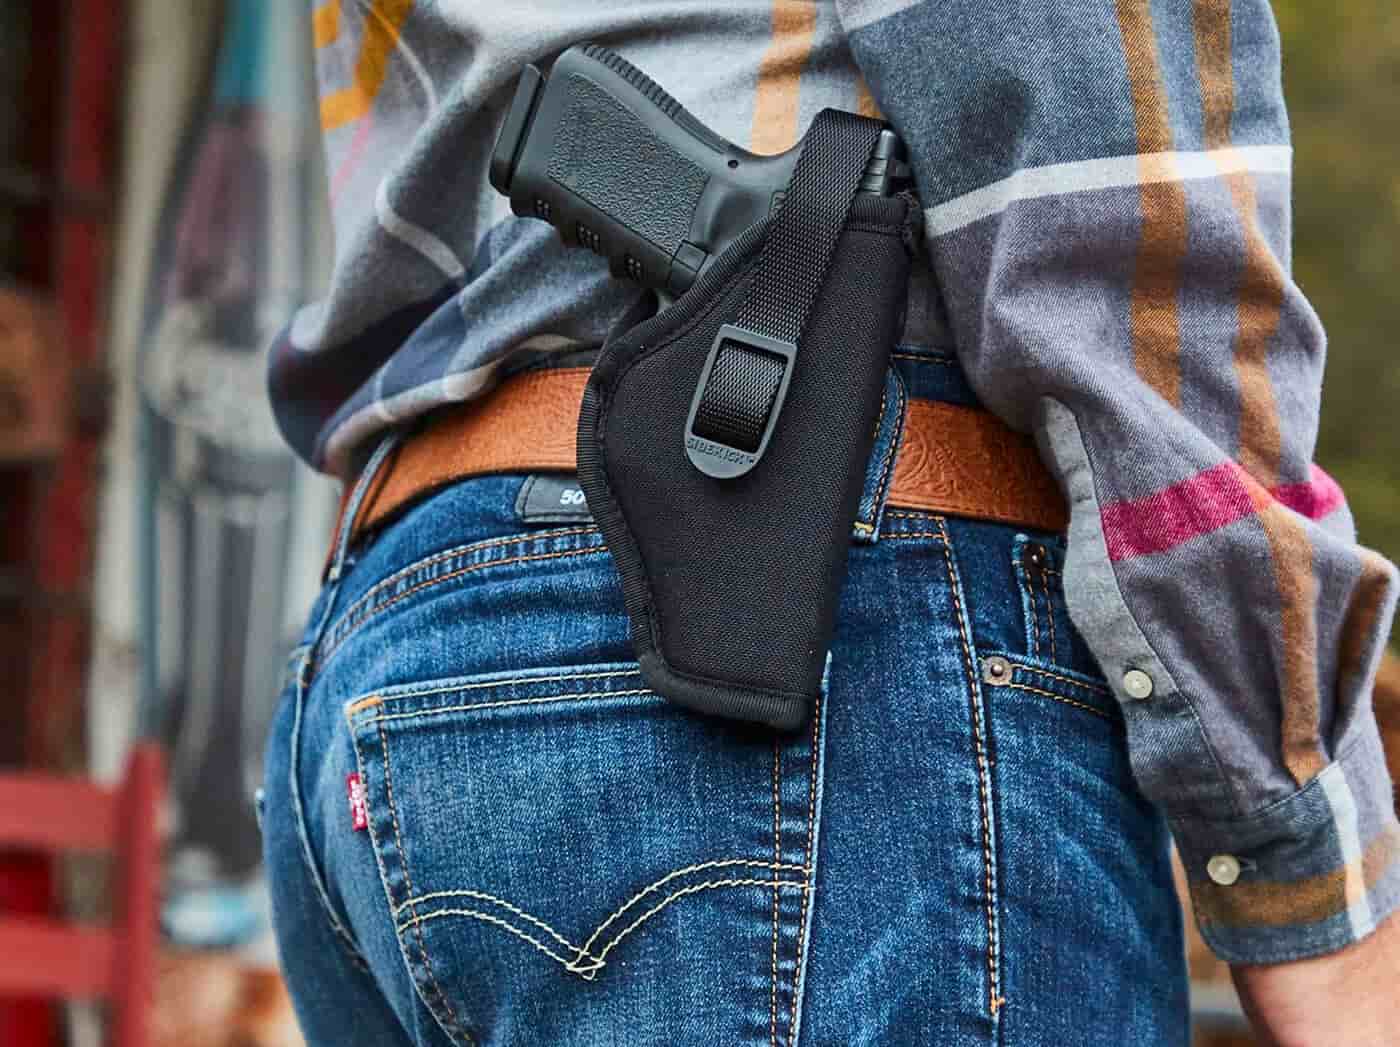 How should a woman carry her firearm, in her purse or in a holster? - Quora